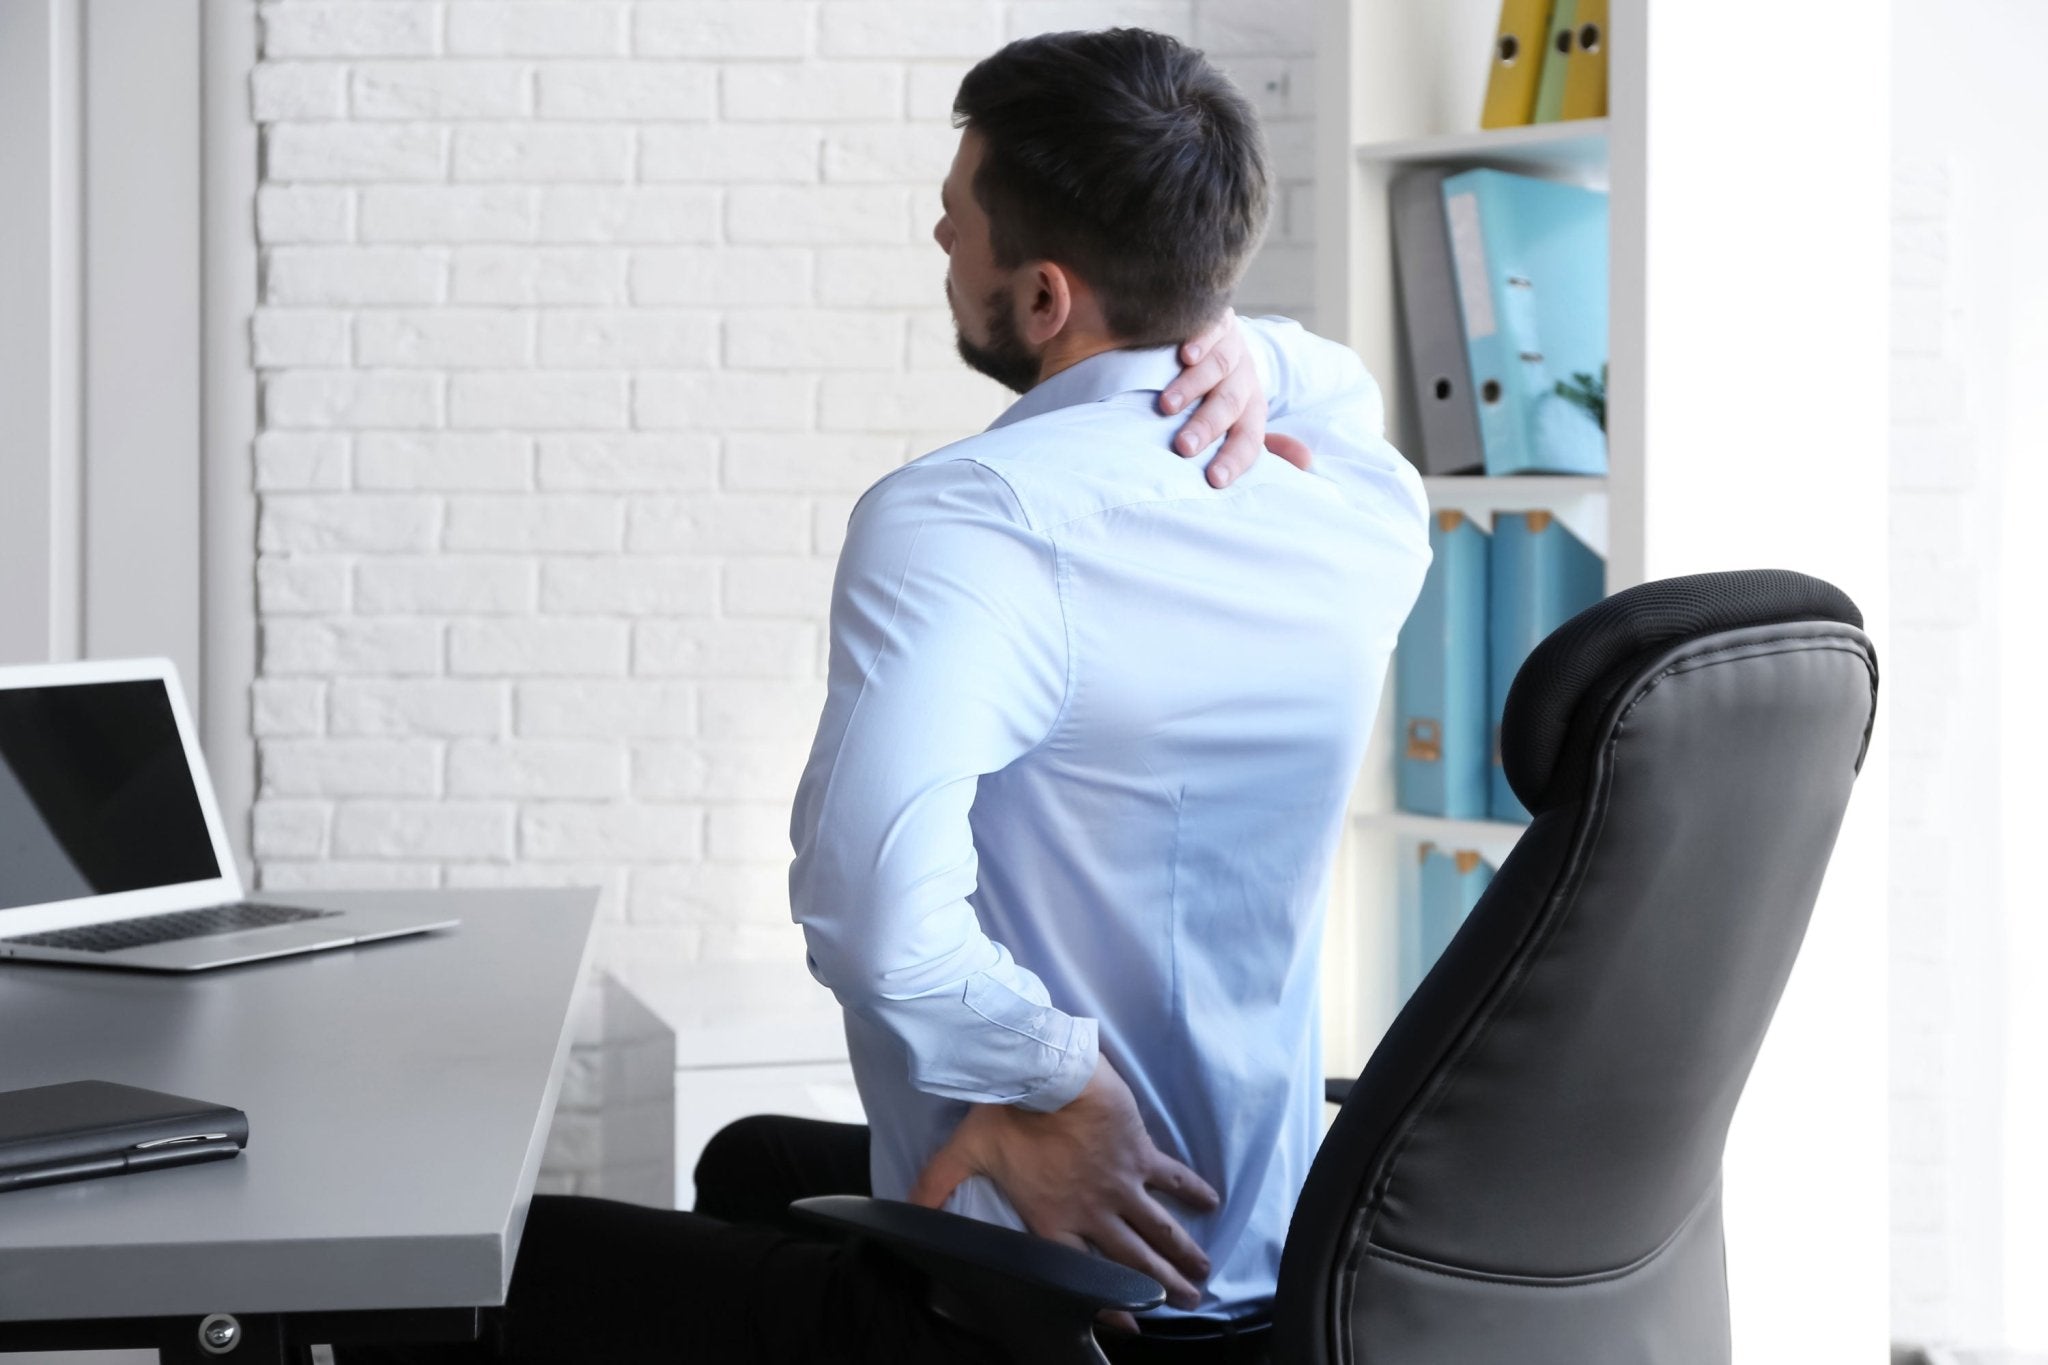 How to Reduce Back Pain from Sitting at a Desk - Mount-It!